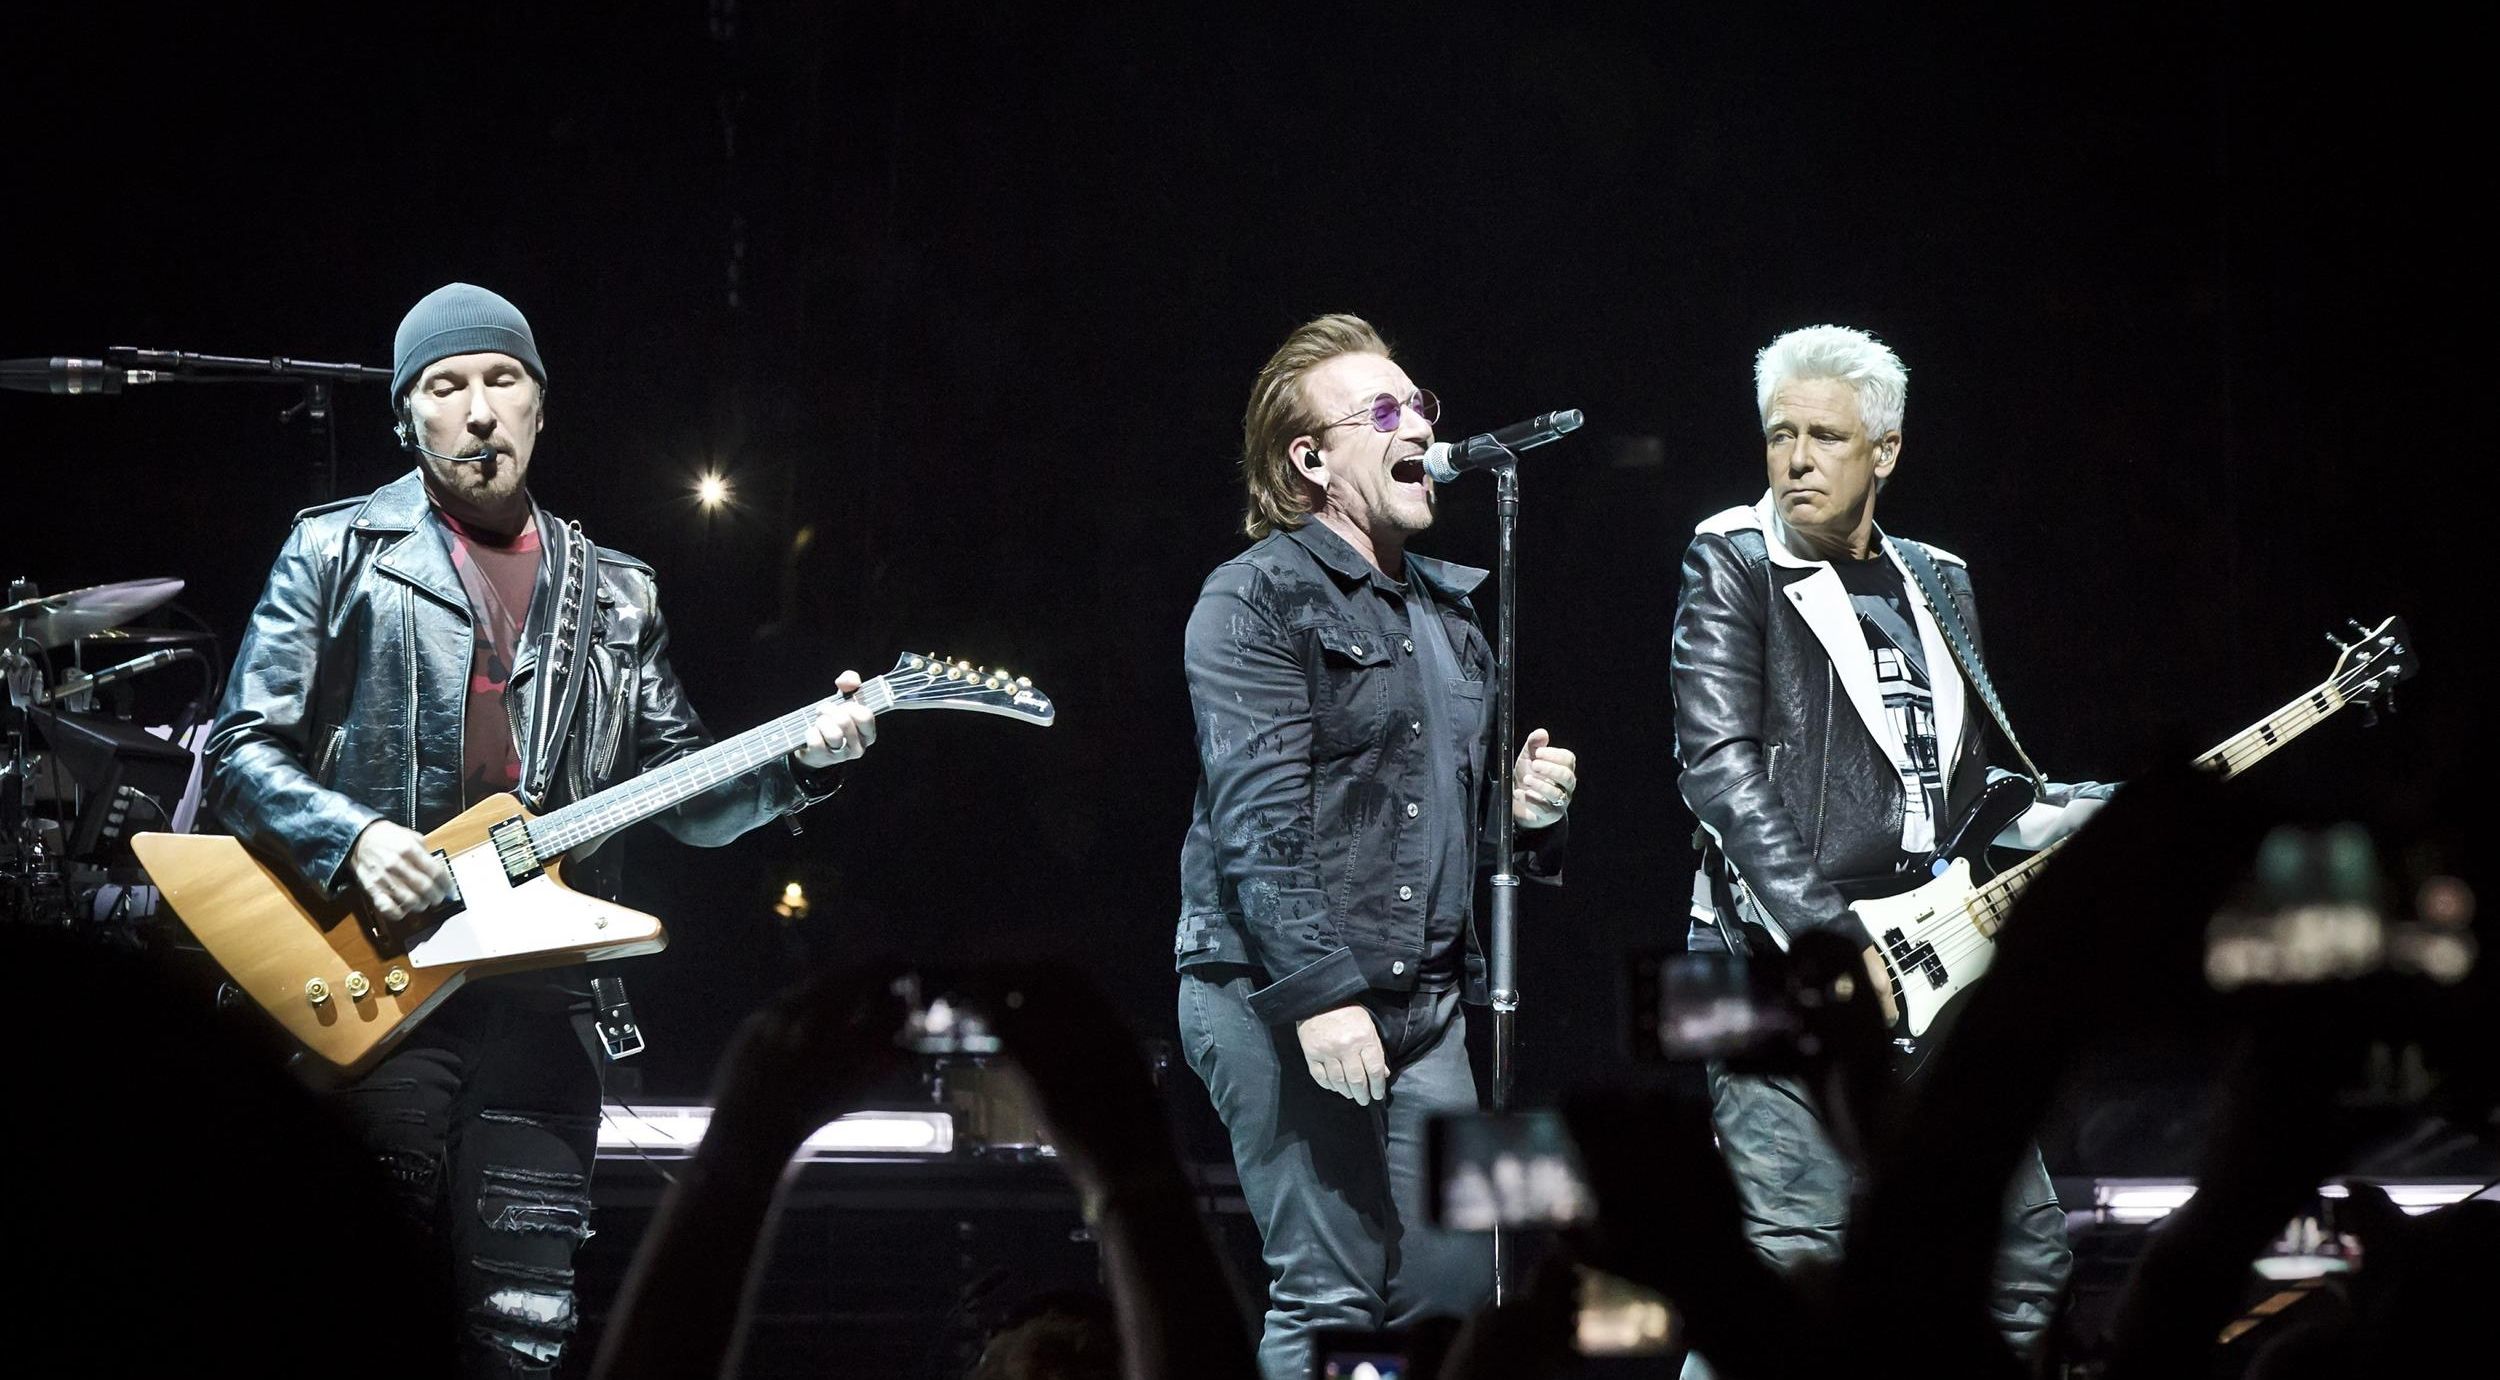 Las Vegas Sphere hosts first concert, putting on spectacle for U2